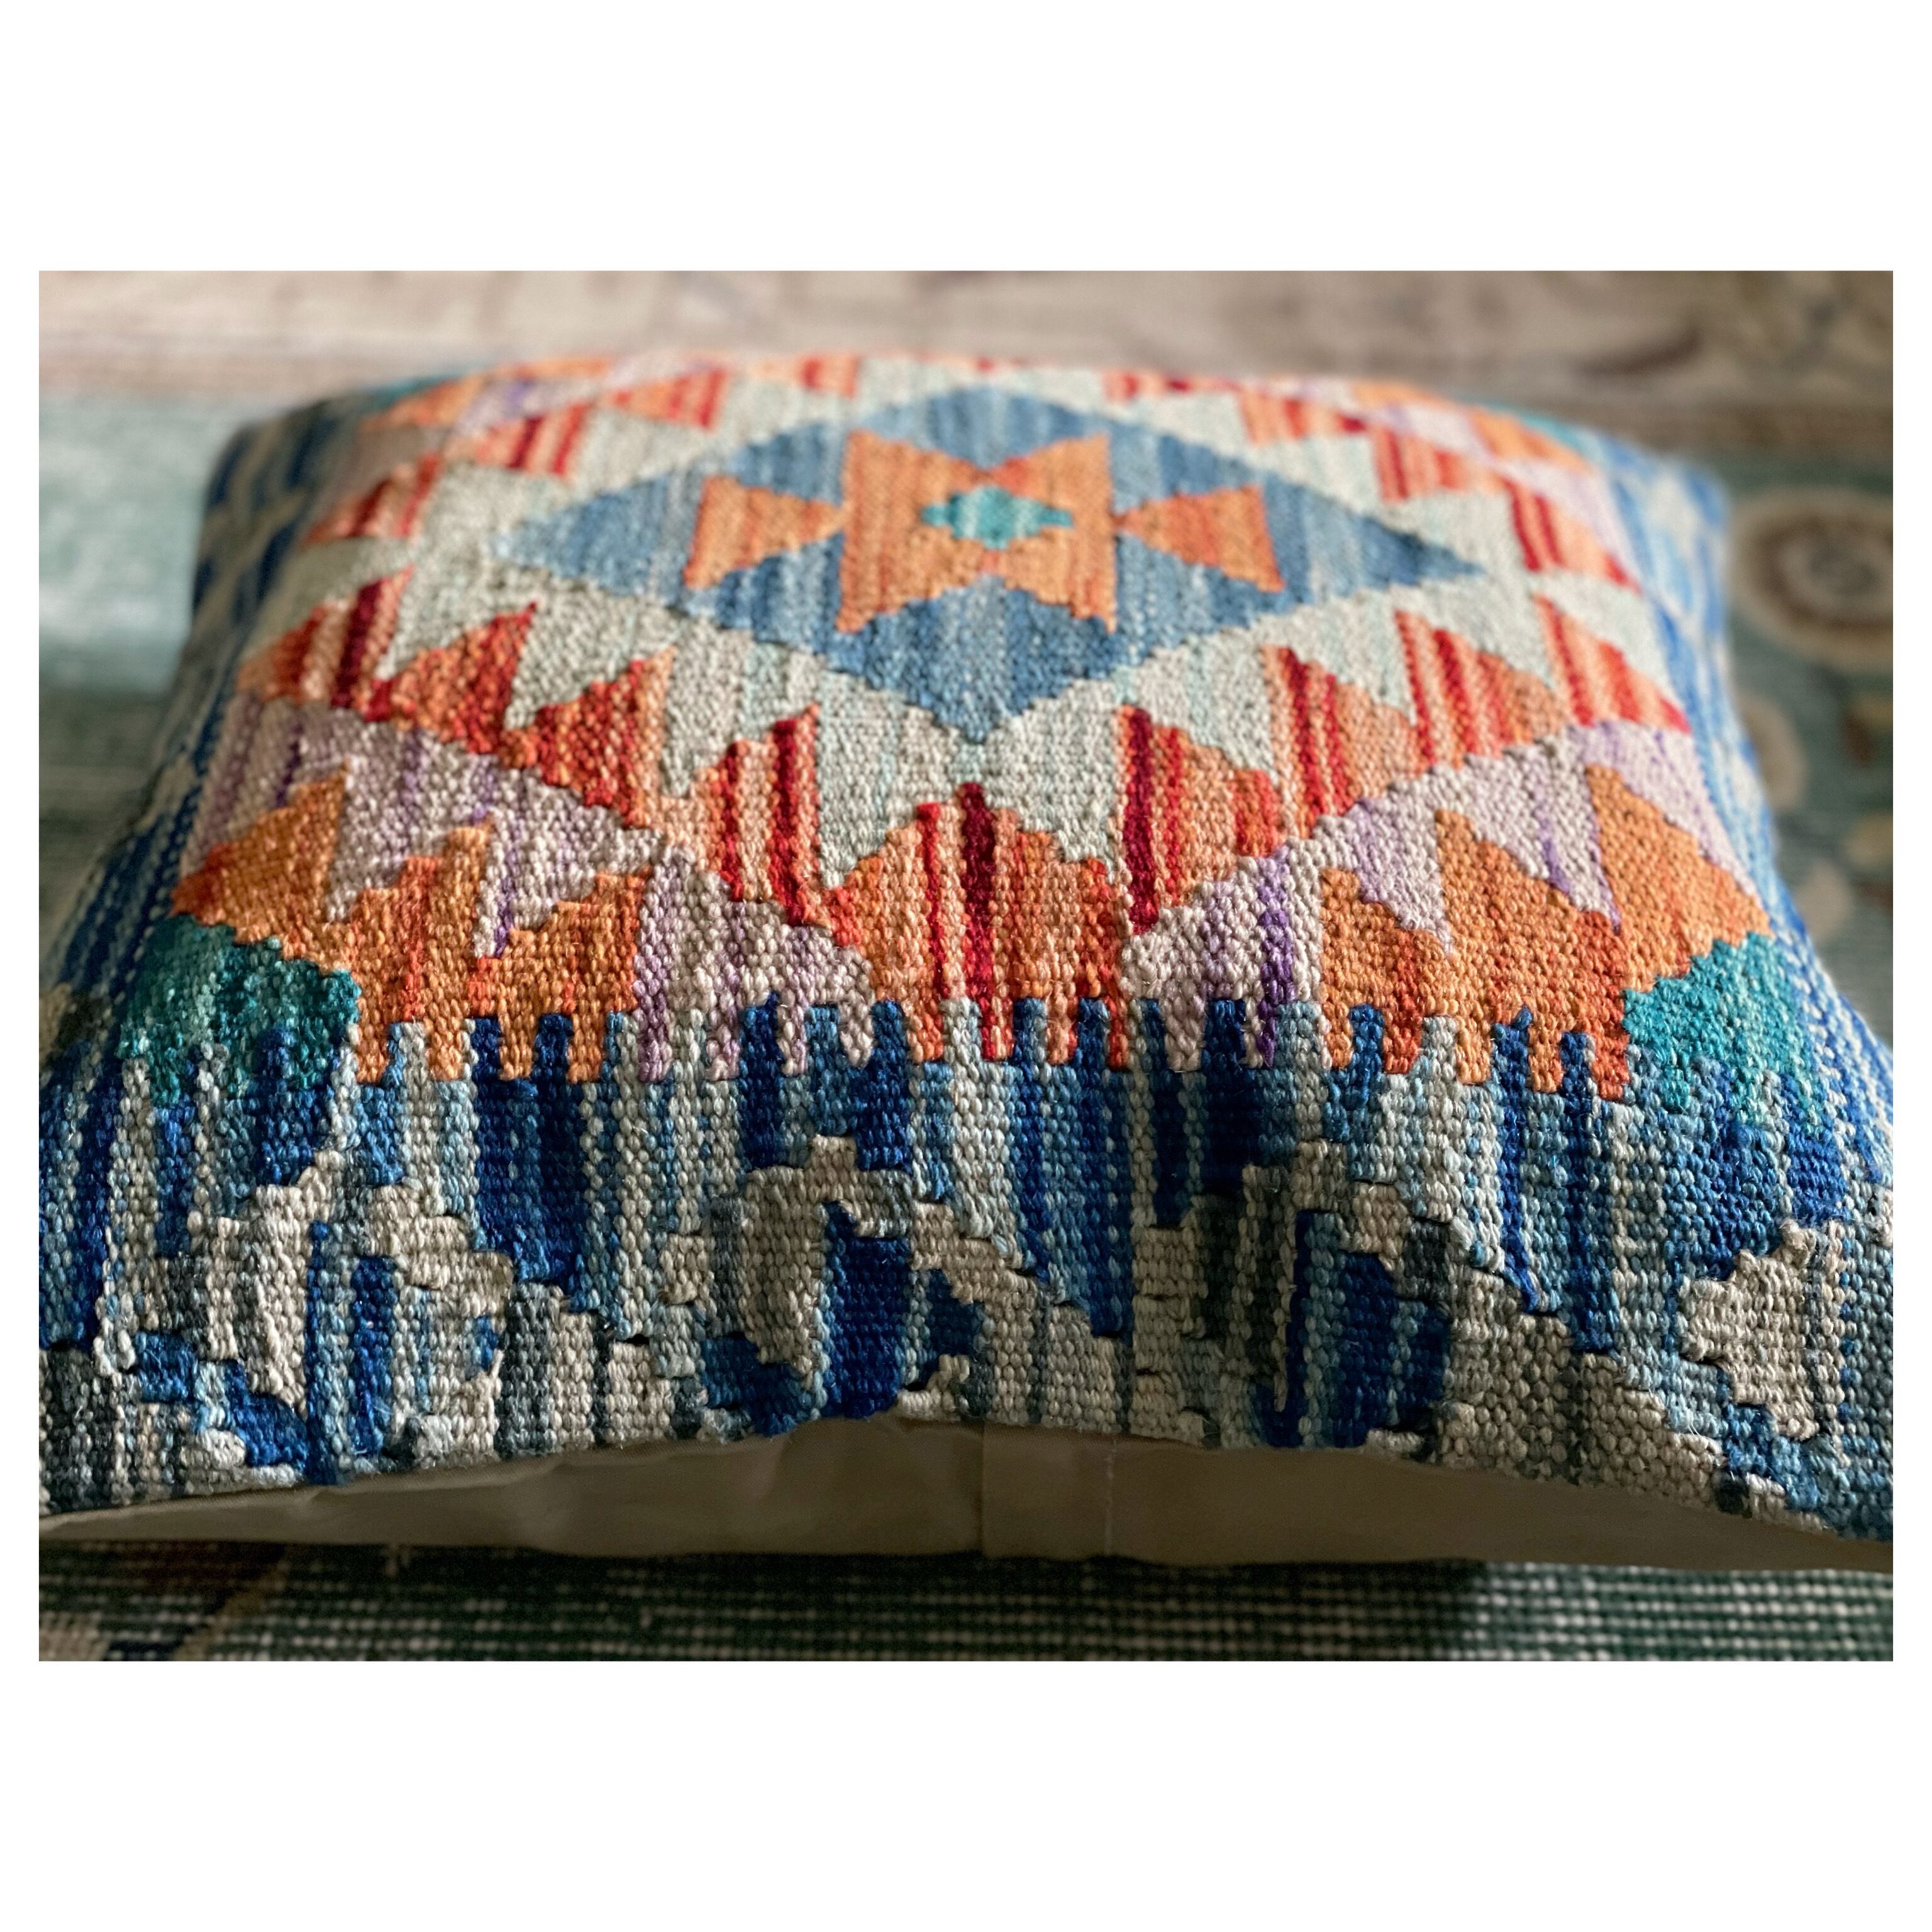 KP0013 44×45cm Old kilim pillow cover クッションカバー ピローケース ピローカバー キリムクッション キリム  キリムピロー pillow cover cushion cover